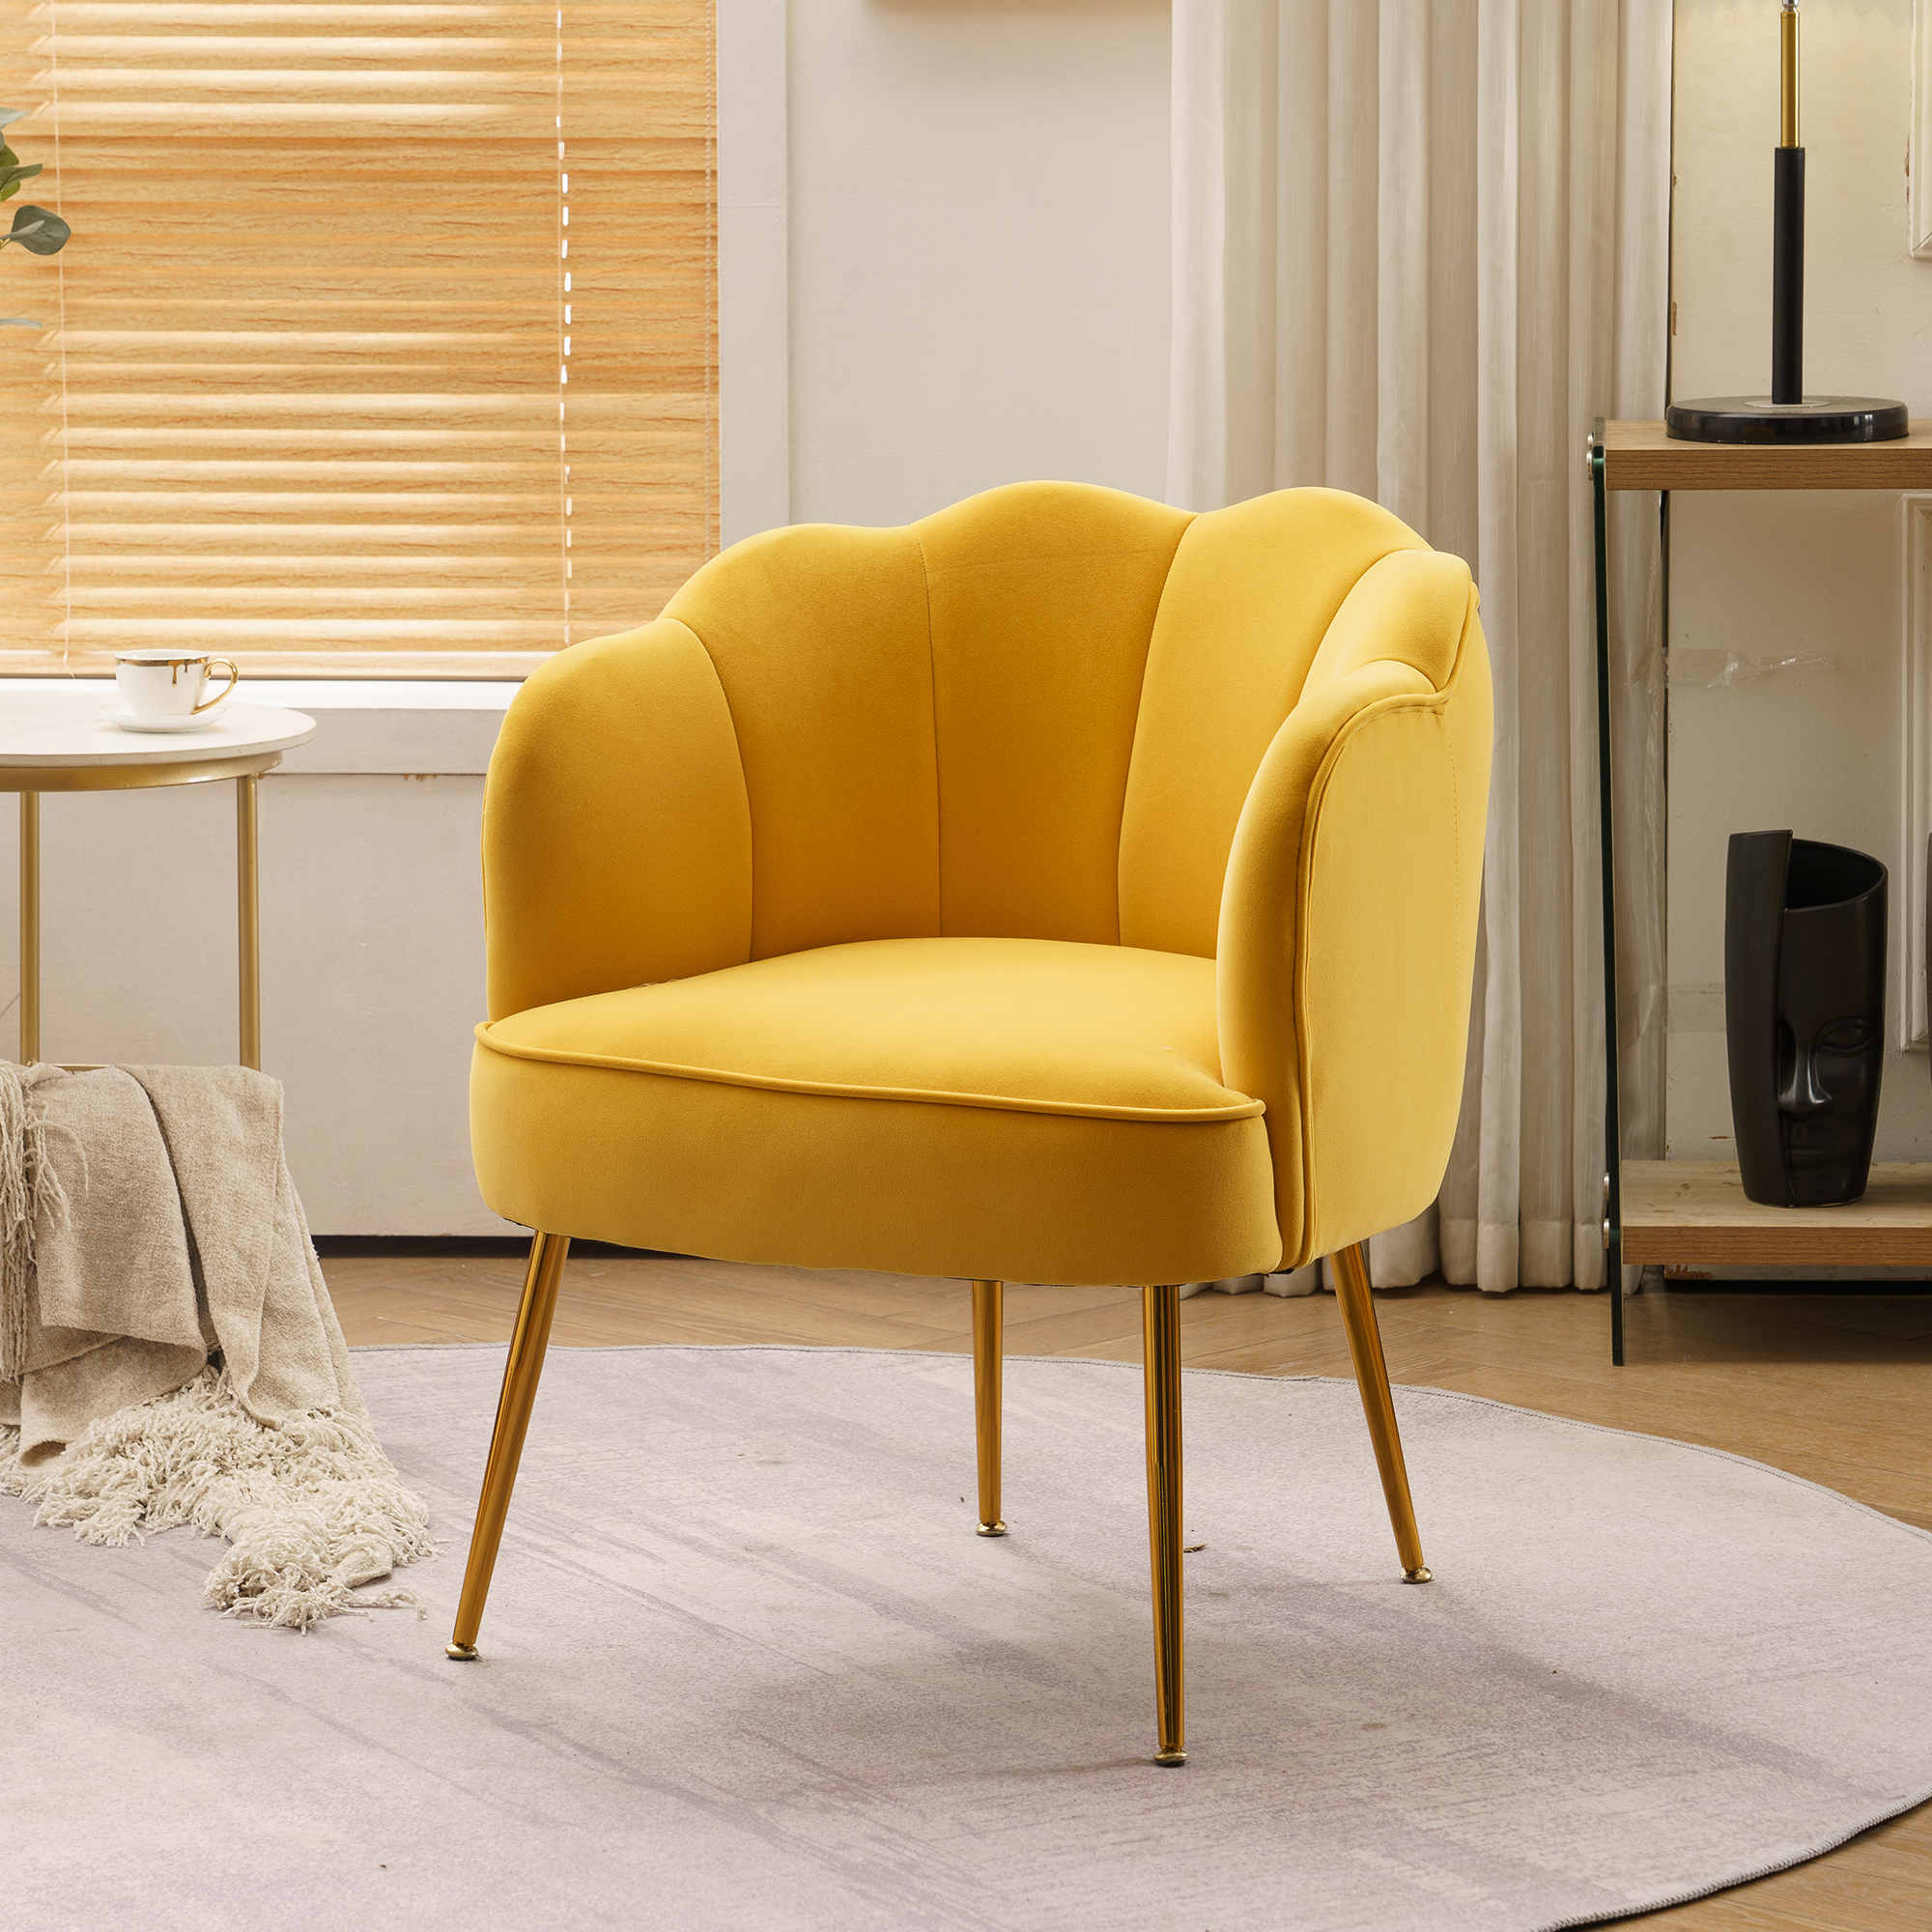 Yellow Shell shape velvet fabric Armchair accent chair with gold legs for living room and bedroom-CASAINC